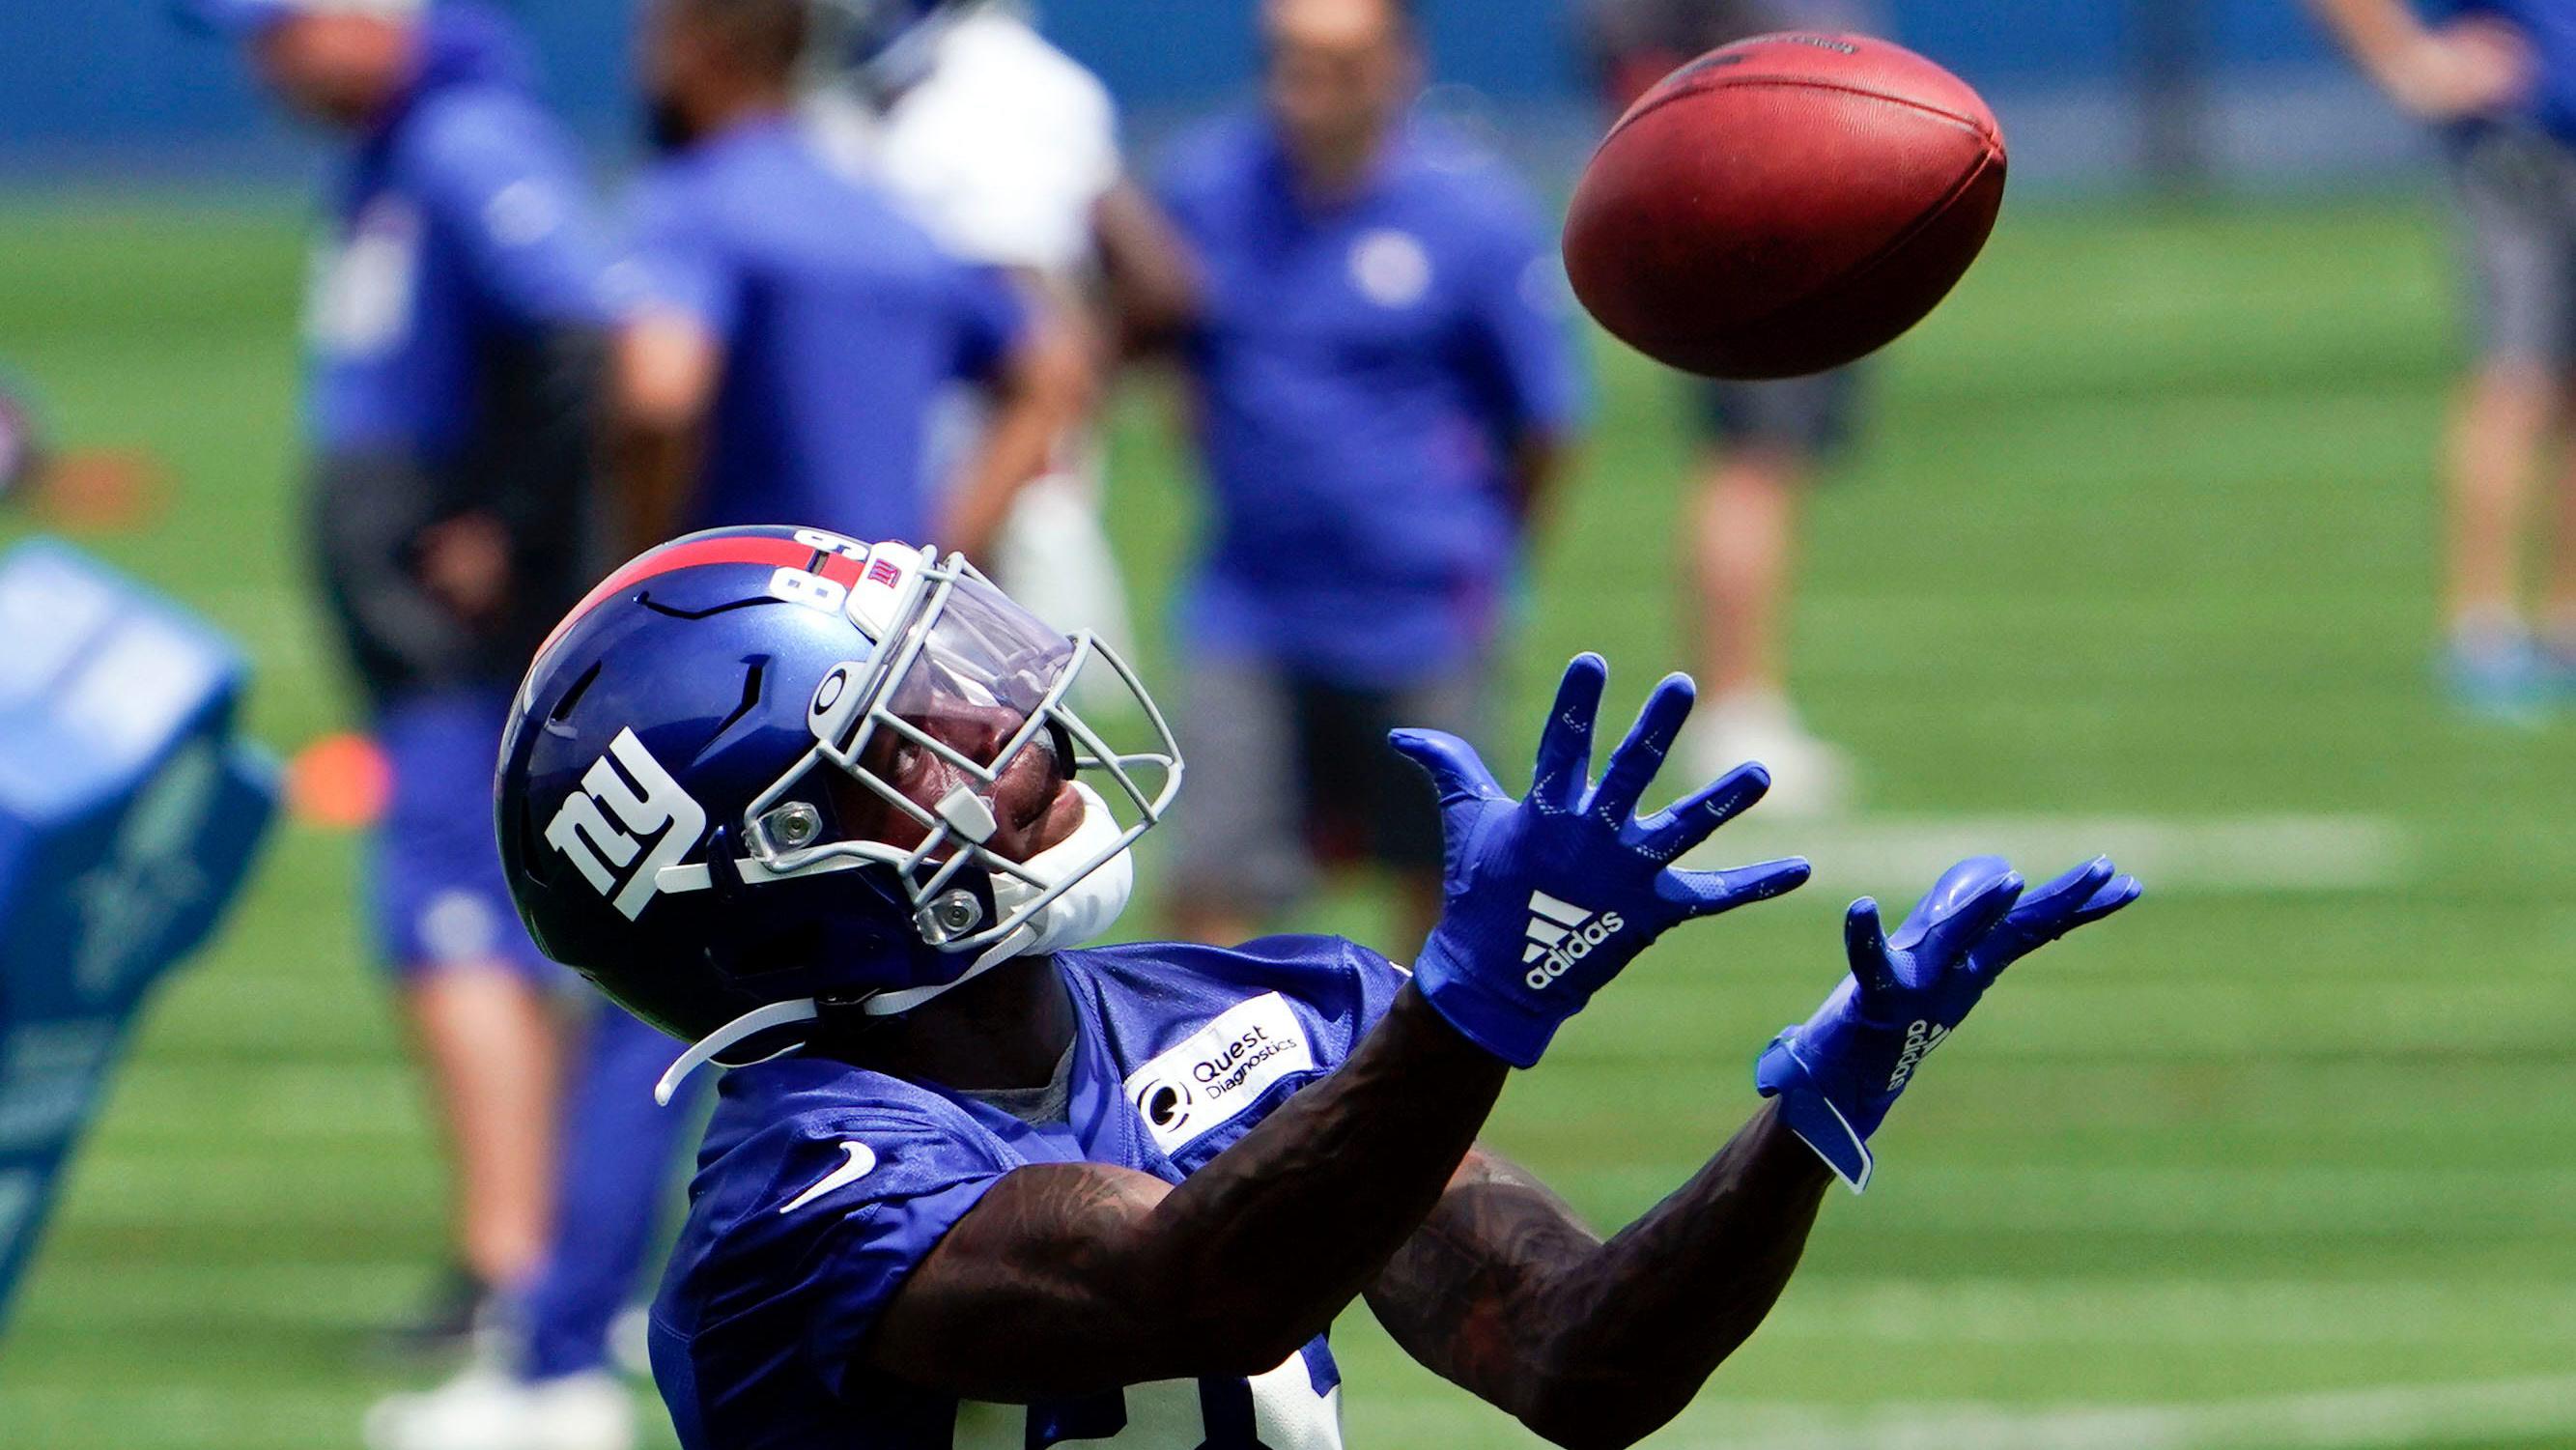 New York Giants rookie wide receiver Kadarius Toney catches the ball on the first day of Giants minicamp at Quest Diagnostics Training Center on Tuesday, June 8, 2021, in East Rutherford / Danielle Parhizkaran/NorthJersey.com-Imagn Content Services, LLC